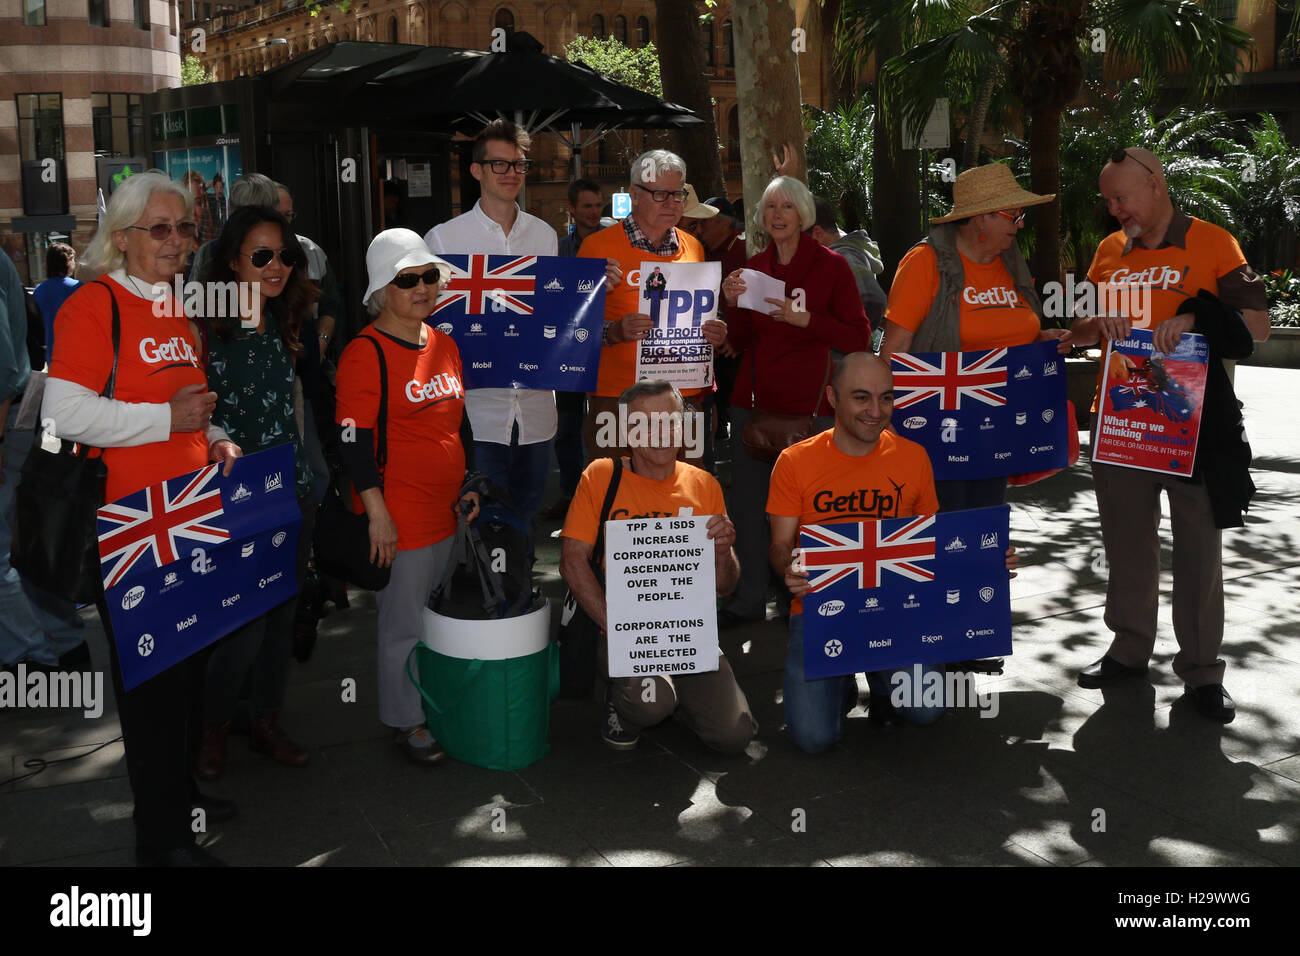 Sydney, Australia. 26 September 2016. Protesters gathered across the road from the hearing of the Parliamentary inquiry into the TPP at 1 Bligh Street, Sydney to rally against the Trans Pacific Partnership. They say the TPP expands corporate power at the expense of access to medicines, workers' rights and the environment. Credit:  Richard Milnes/Alamy Live News Stock Photo